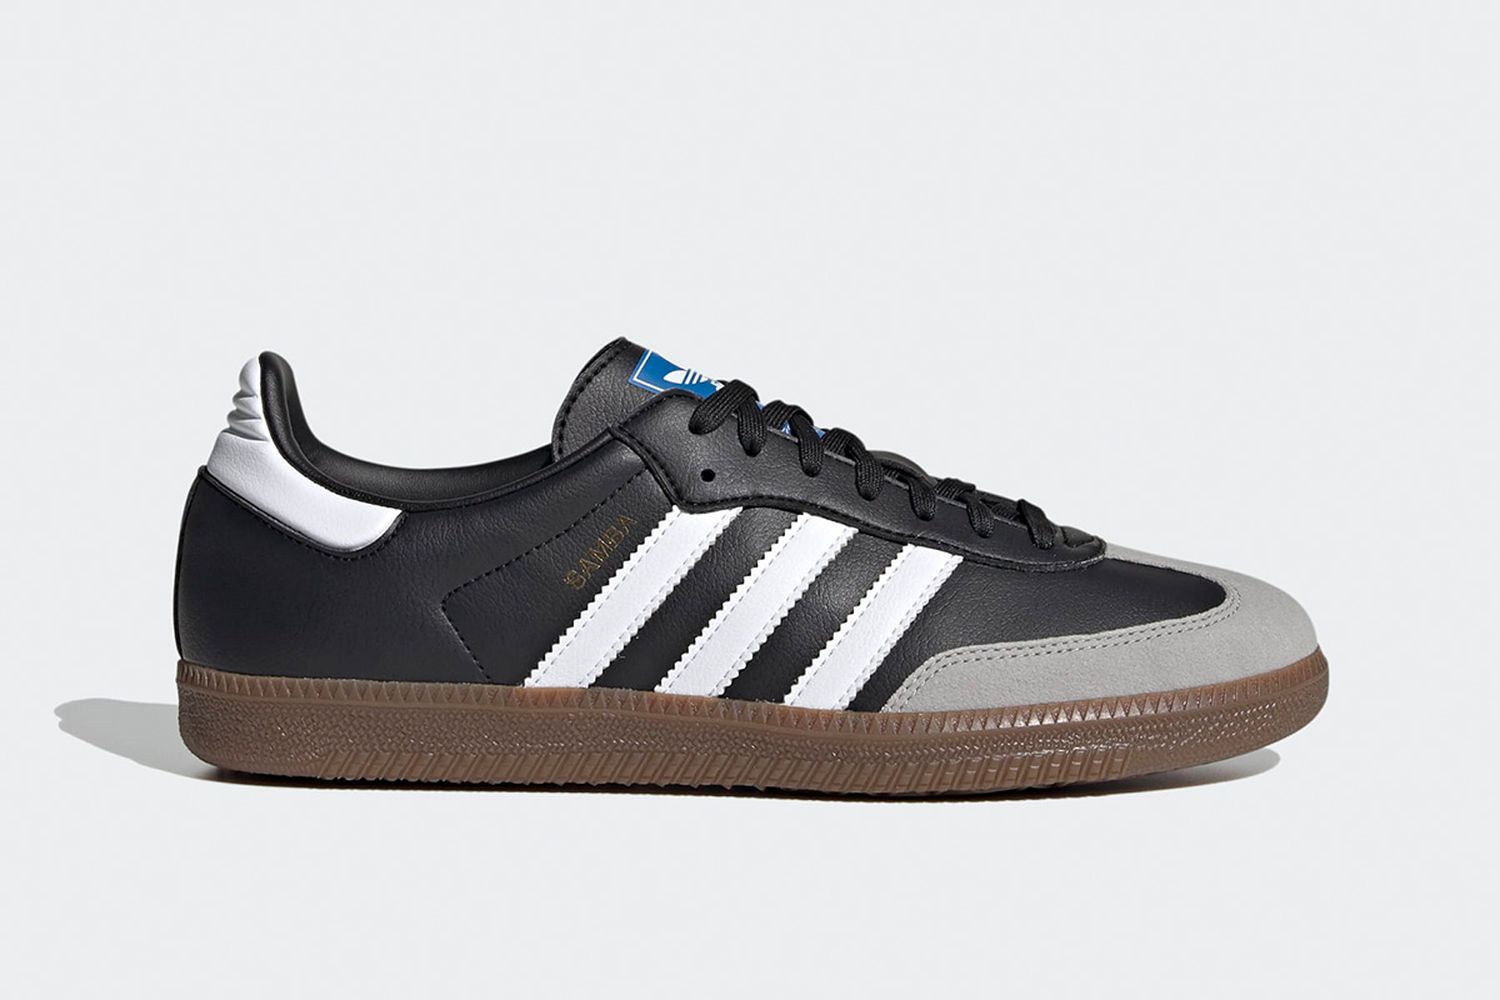 Fértil pista poco claro 9 Pairs of Classic adidas Sneakers That Every Rotation Needs